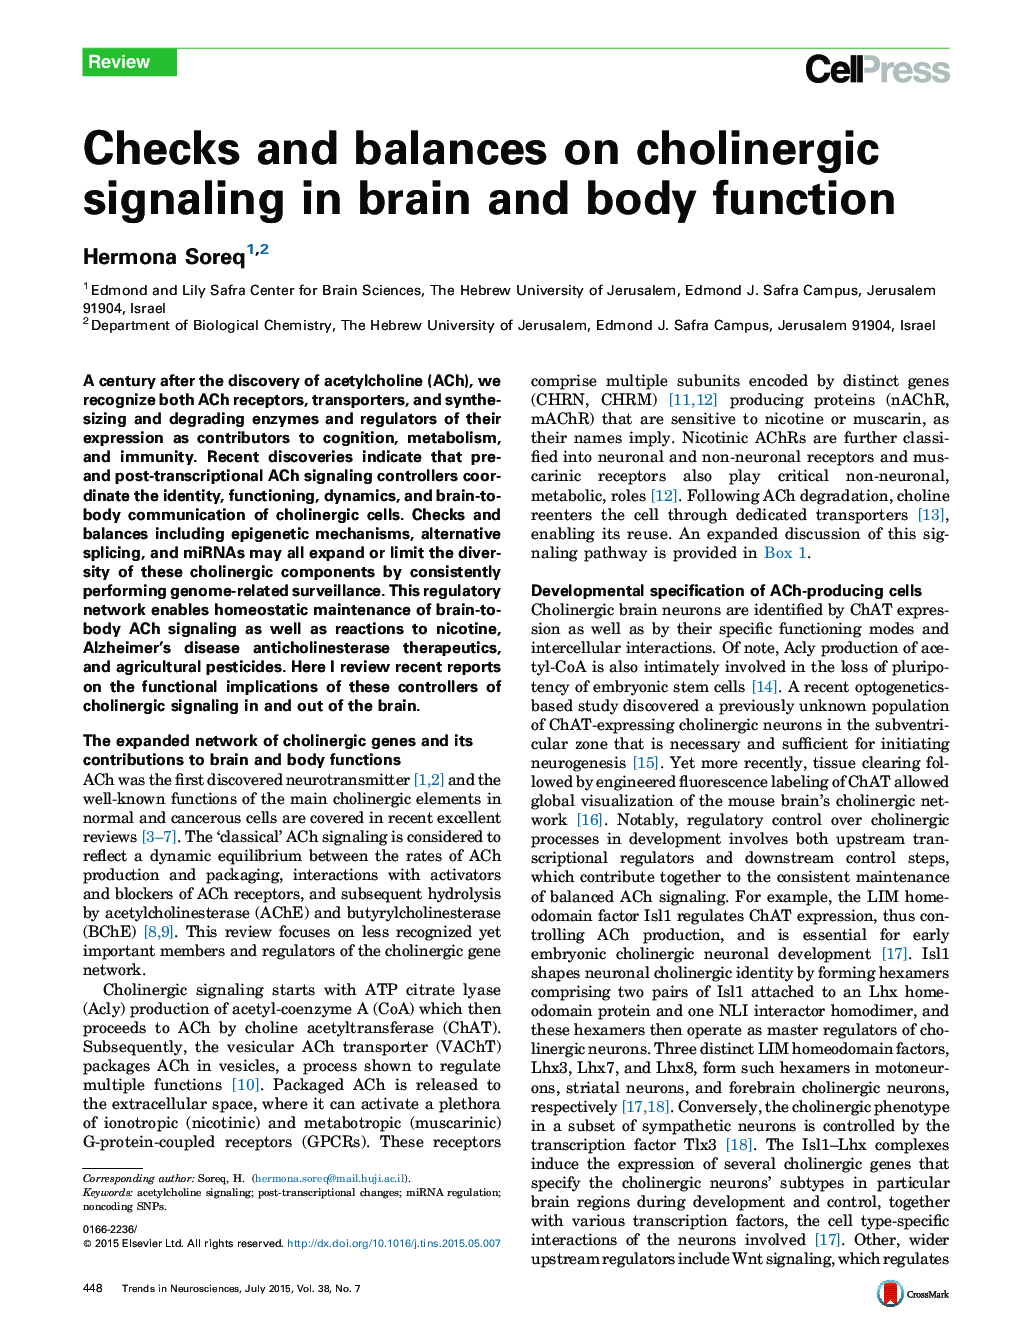 Checks and balances on cholinergic signaling in brain and body function